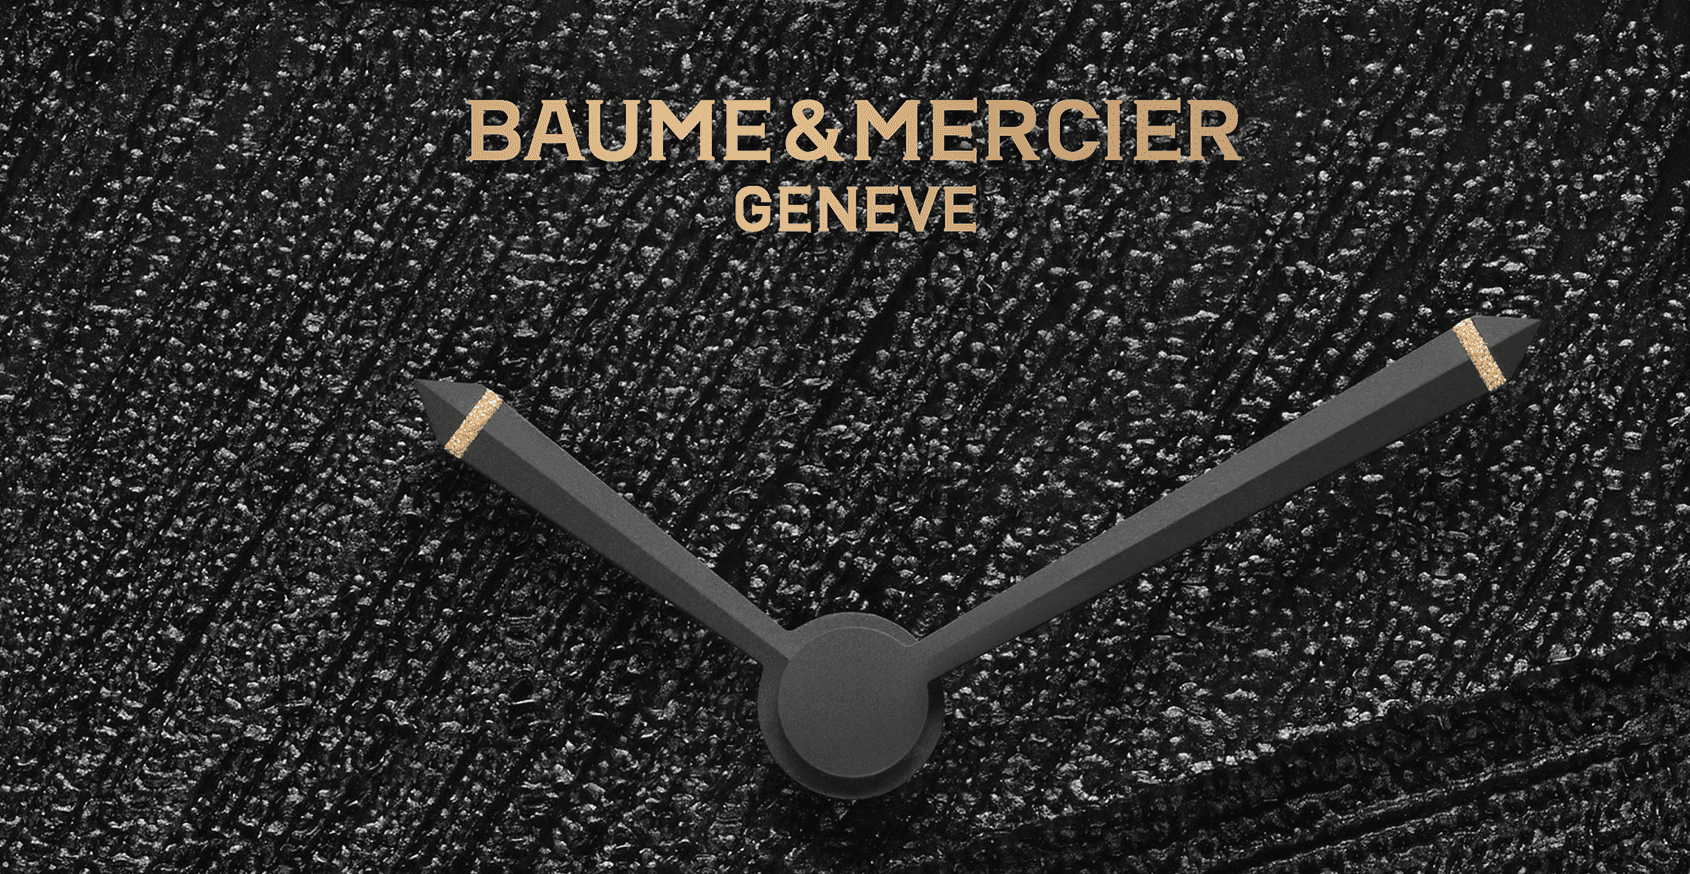 Has Baume & Mercier dropped the most interesting dial of the year so far?